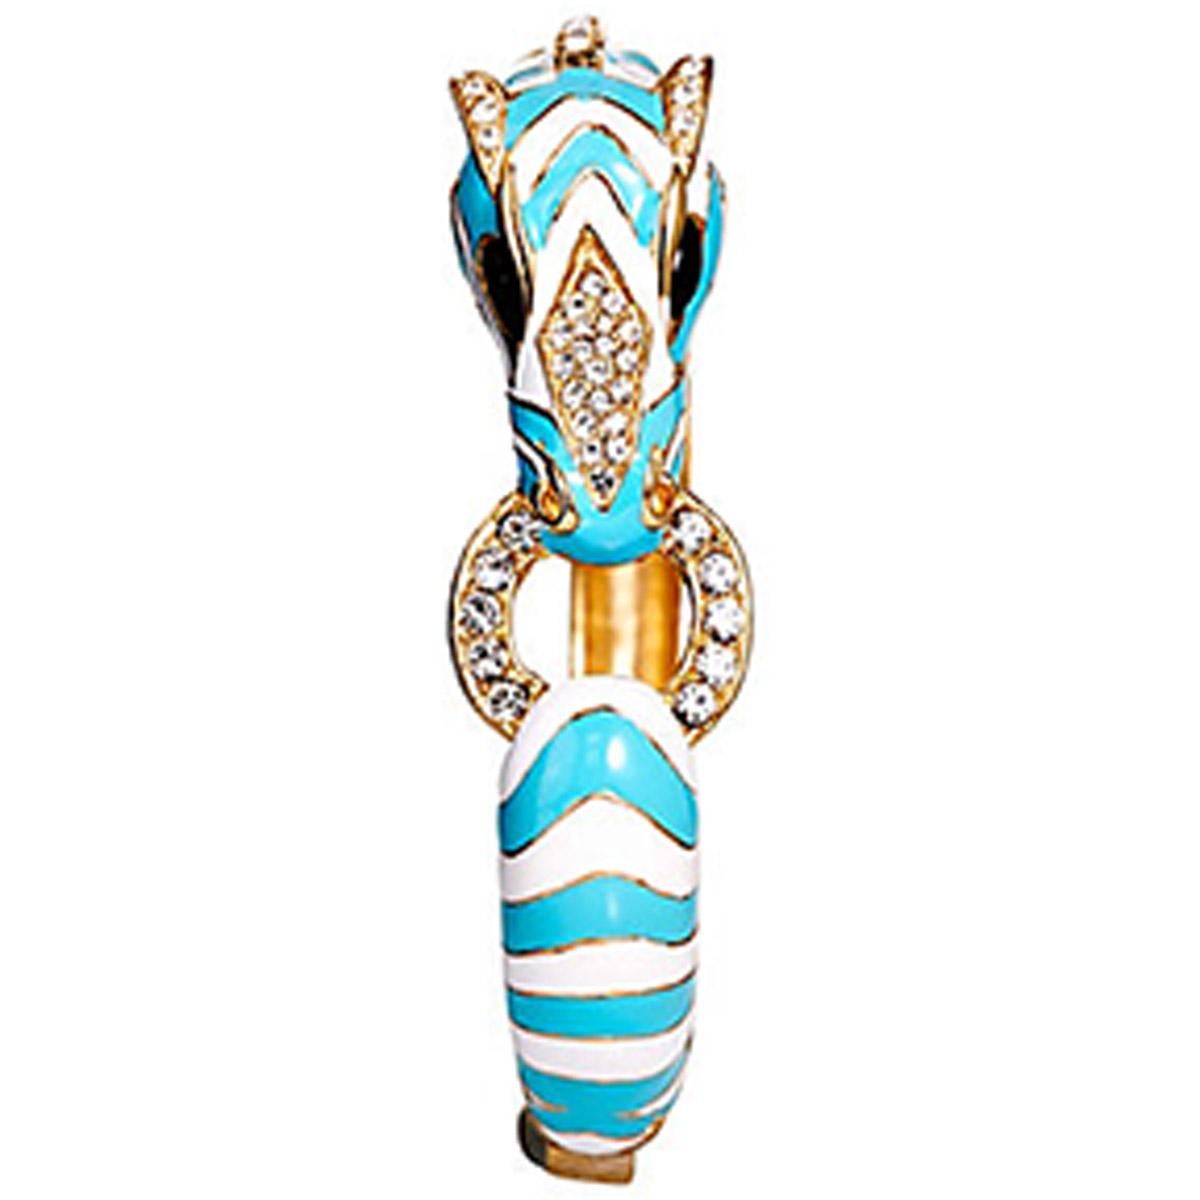 The CINER Zebra Animal Bracelet will be a striking addition to your jewelry collection! 

PLEASE NOTE: The pieces available are not vintage and are not reproductions. 
CINER uses original models to produce our jewelry today.
If you would like to